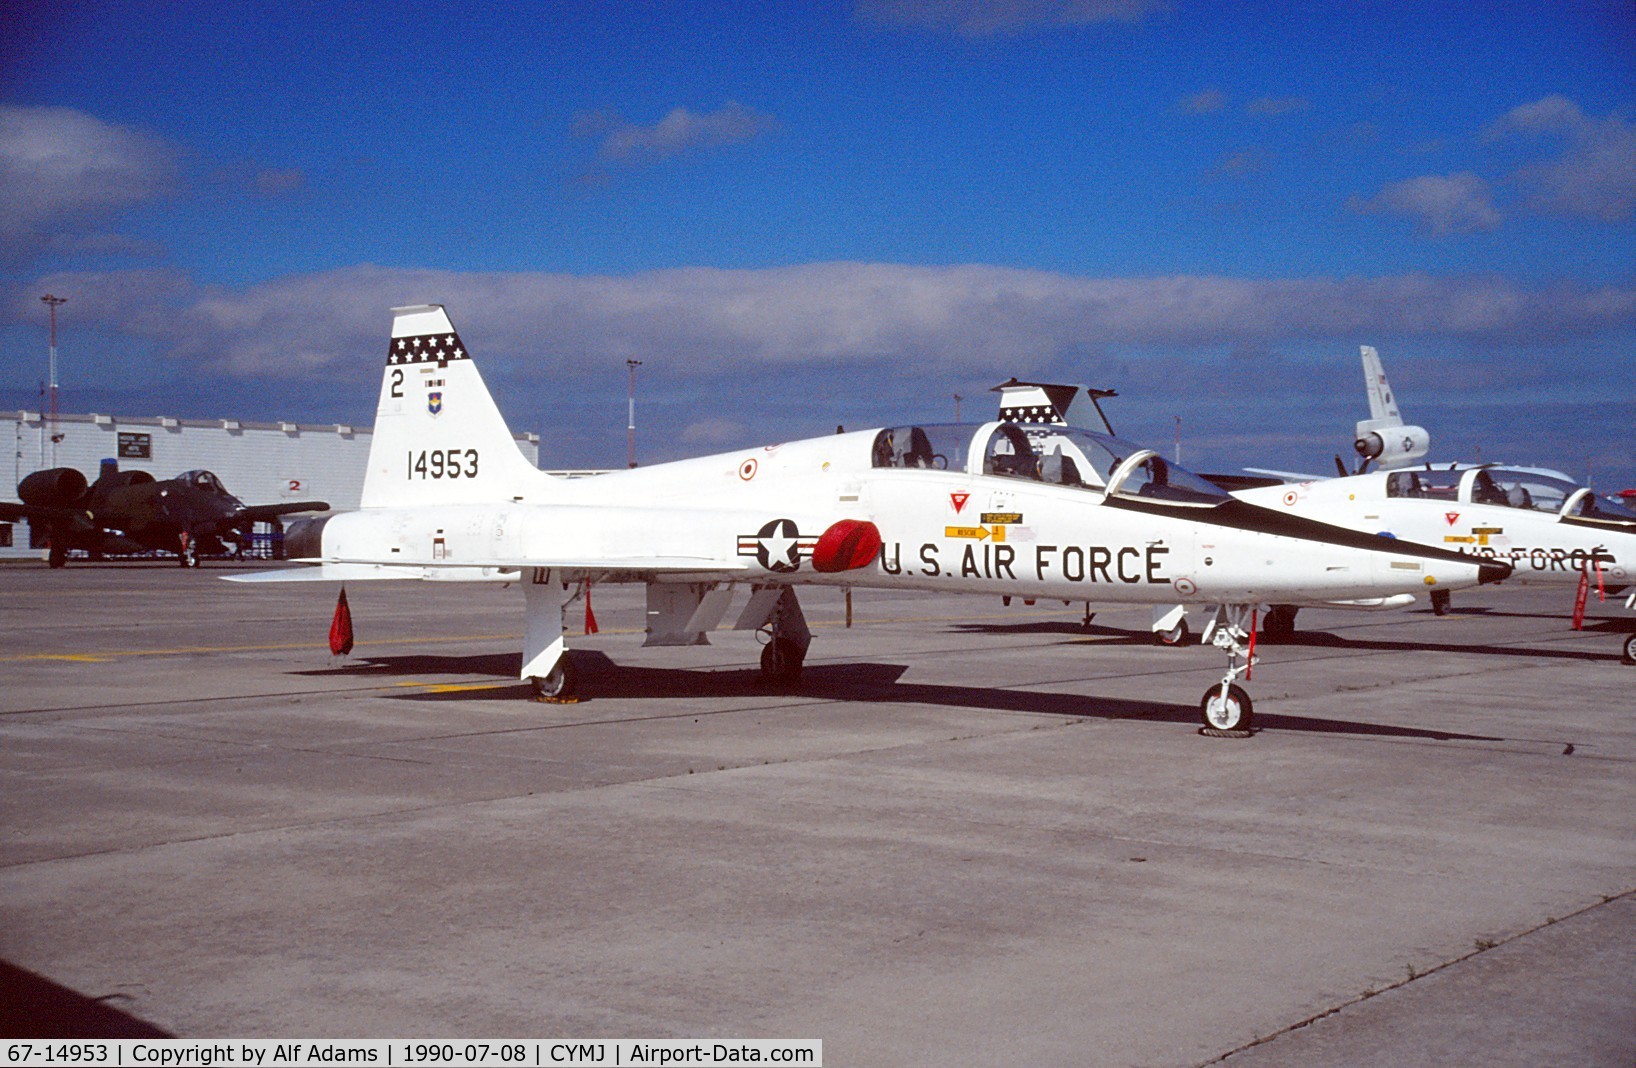 67-14953, 1967 Northrop T-38A Talon C/N T.6094, At the airshow at Canadian Forces Base Moose Jaw, Saskatchewan, in July 1990.